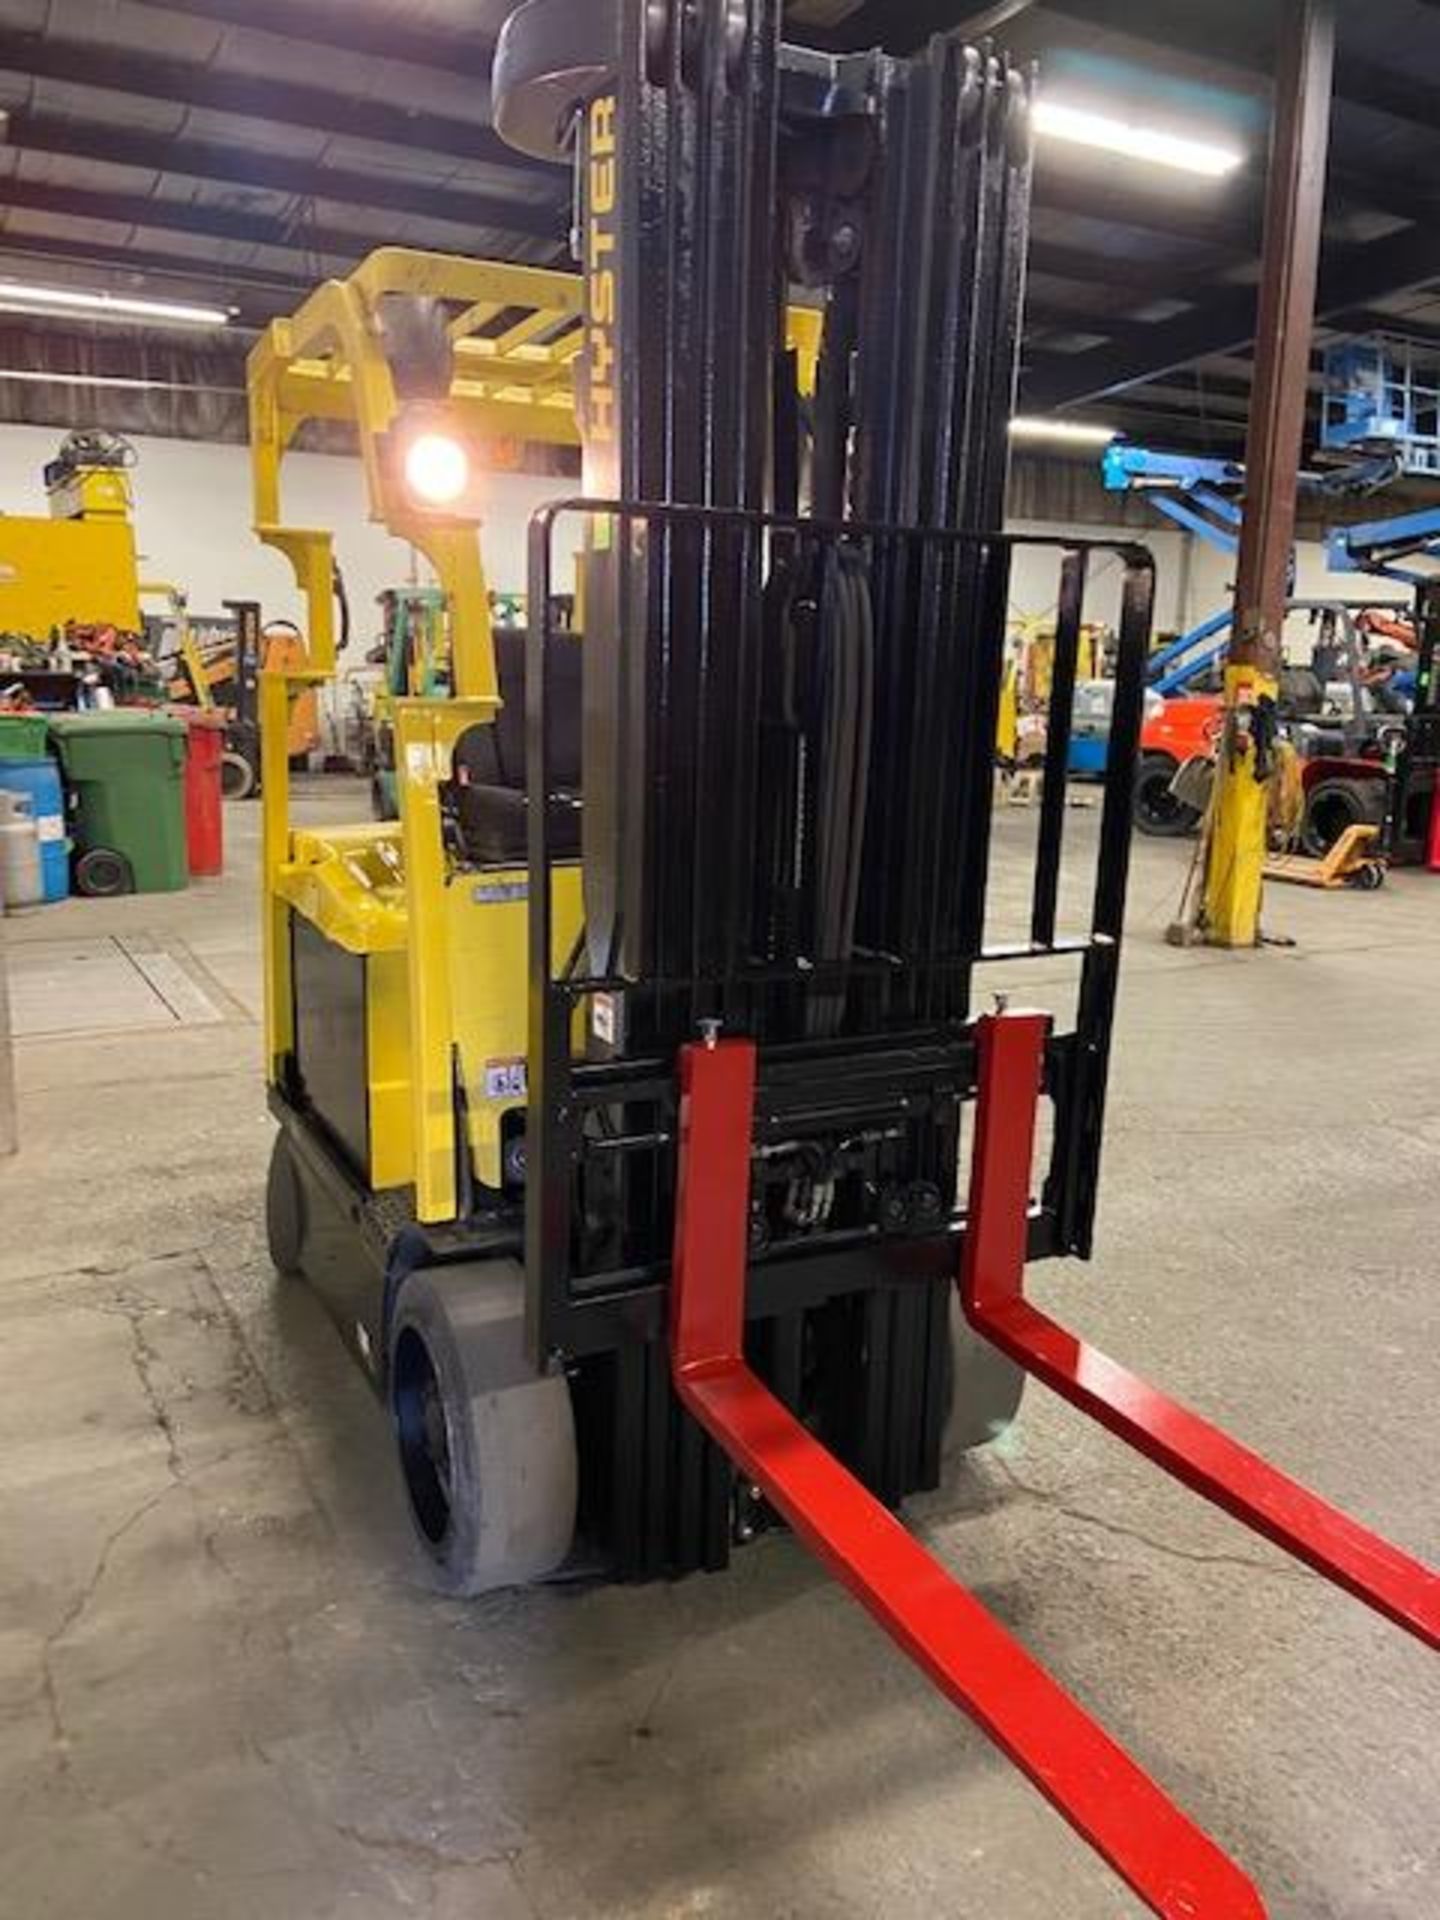 FREE CUSTOMS - 2013 Hyster 5000lbs Capacity Forklift Electric with 4-stage mast with sideshift - Image 2 of 3